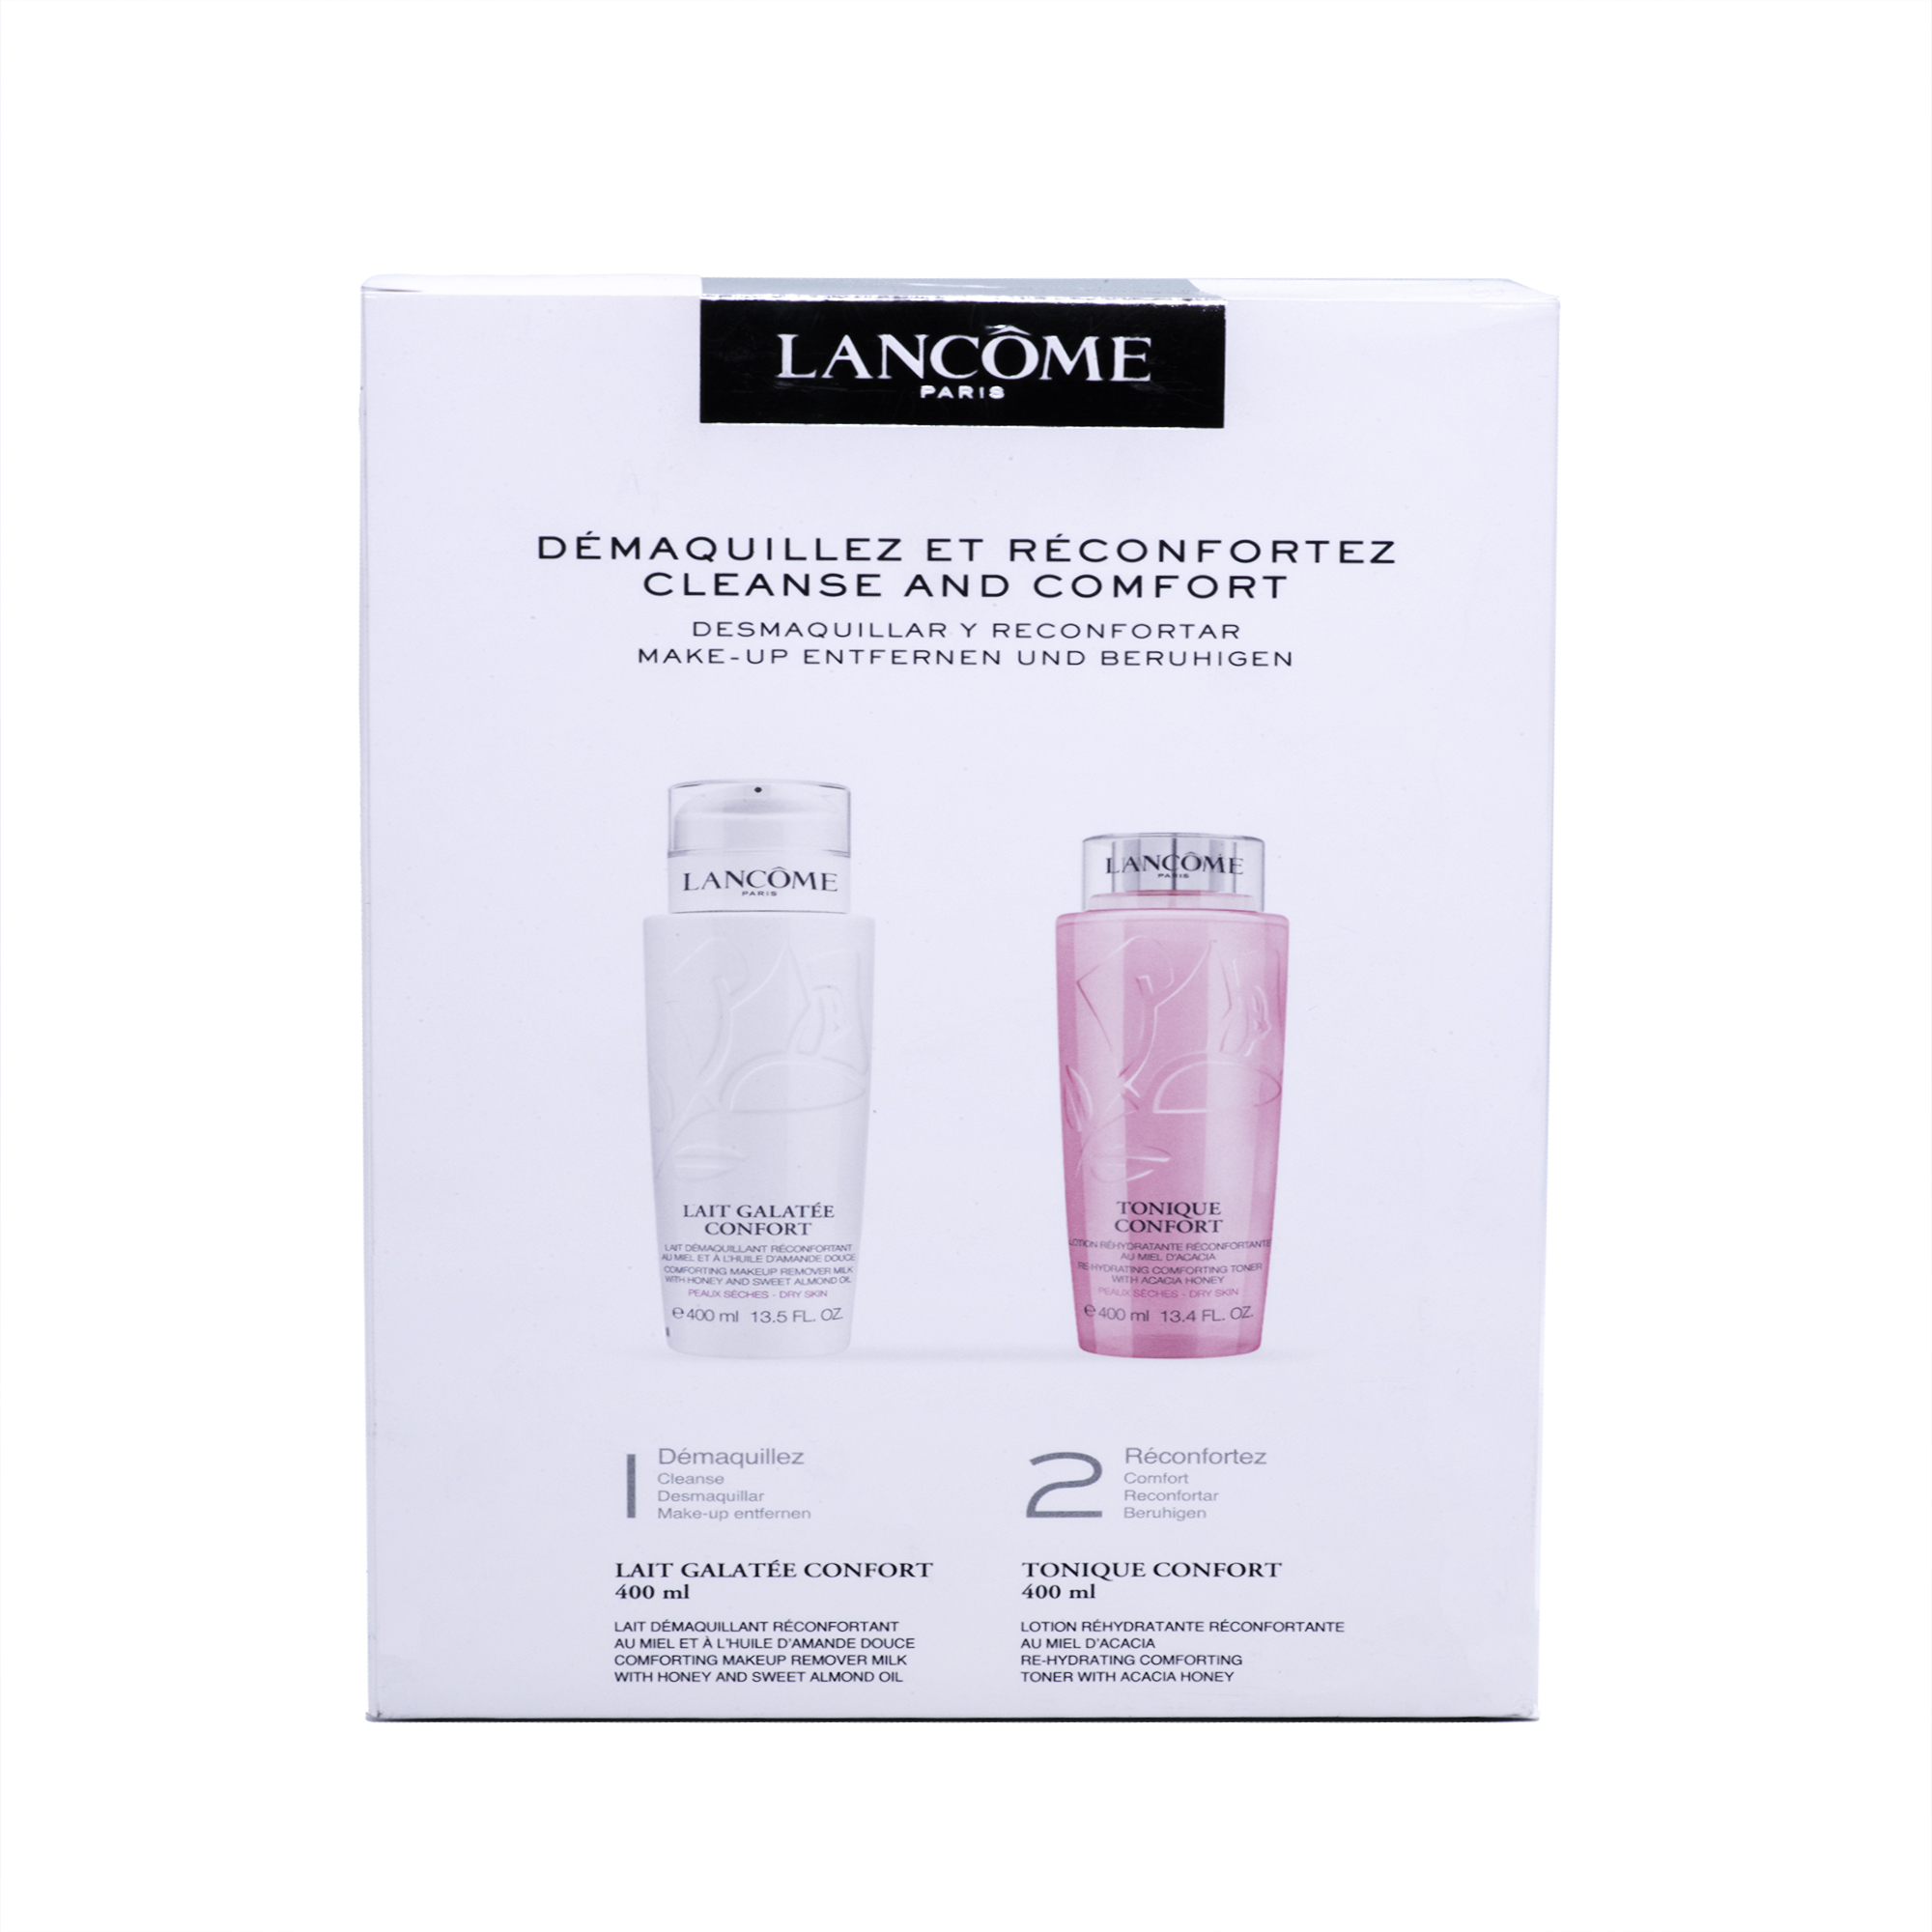 Lancome Confort Duo Box. Removes make-up and moisturizes dry skin. For gently purified skin - image 2 of 2